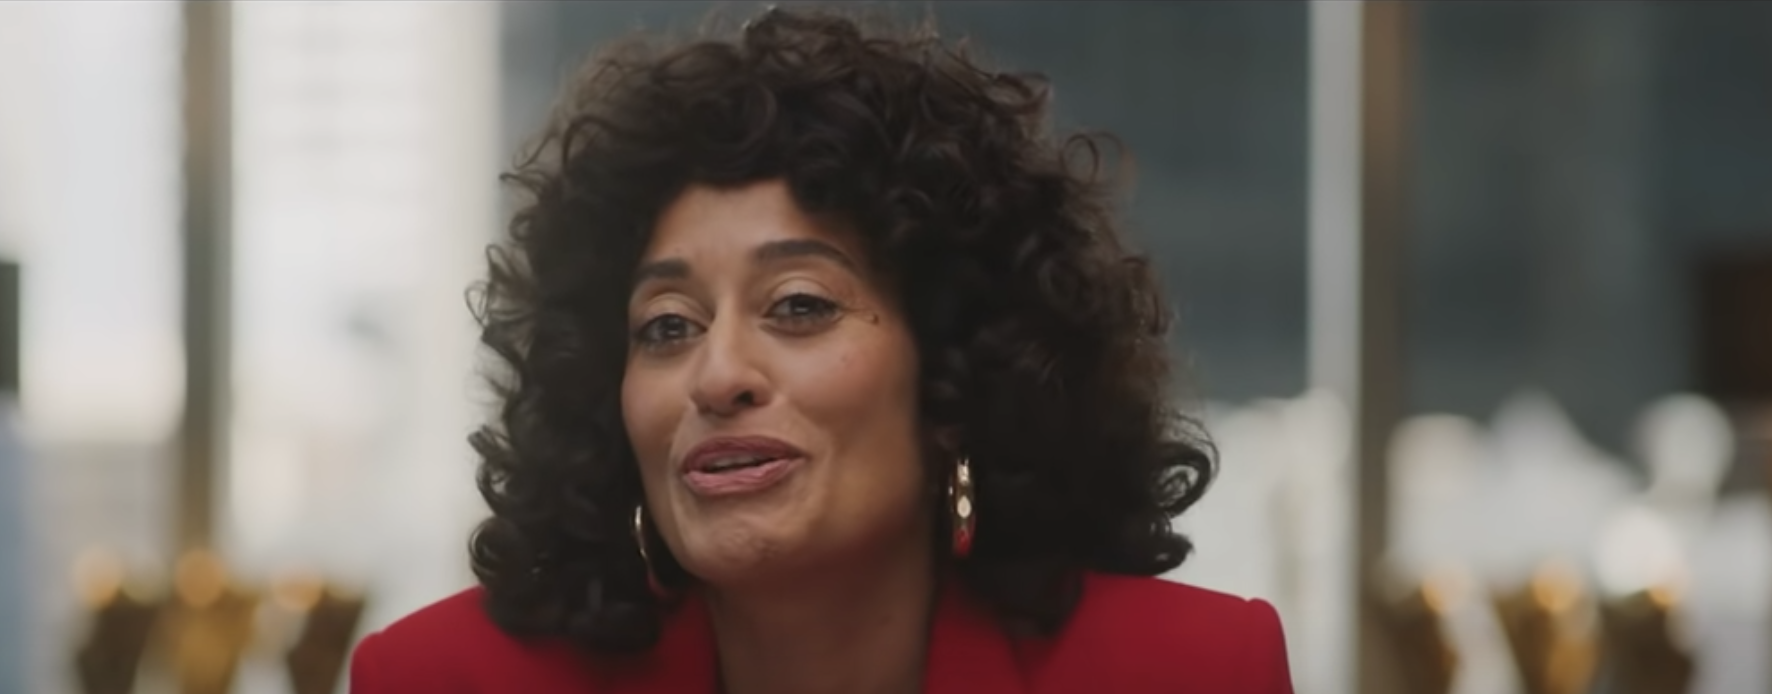 The dazzling world of the LA music scene comes the story of Grace Davis (Tracee Ellis Ross), a superstar whose talent, and ego, have reached unbelievable heights, and Maggie (Dakota Johnson), her overworked personal assistant